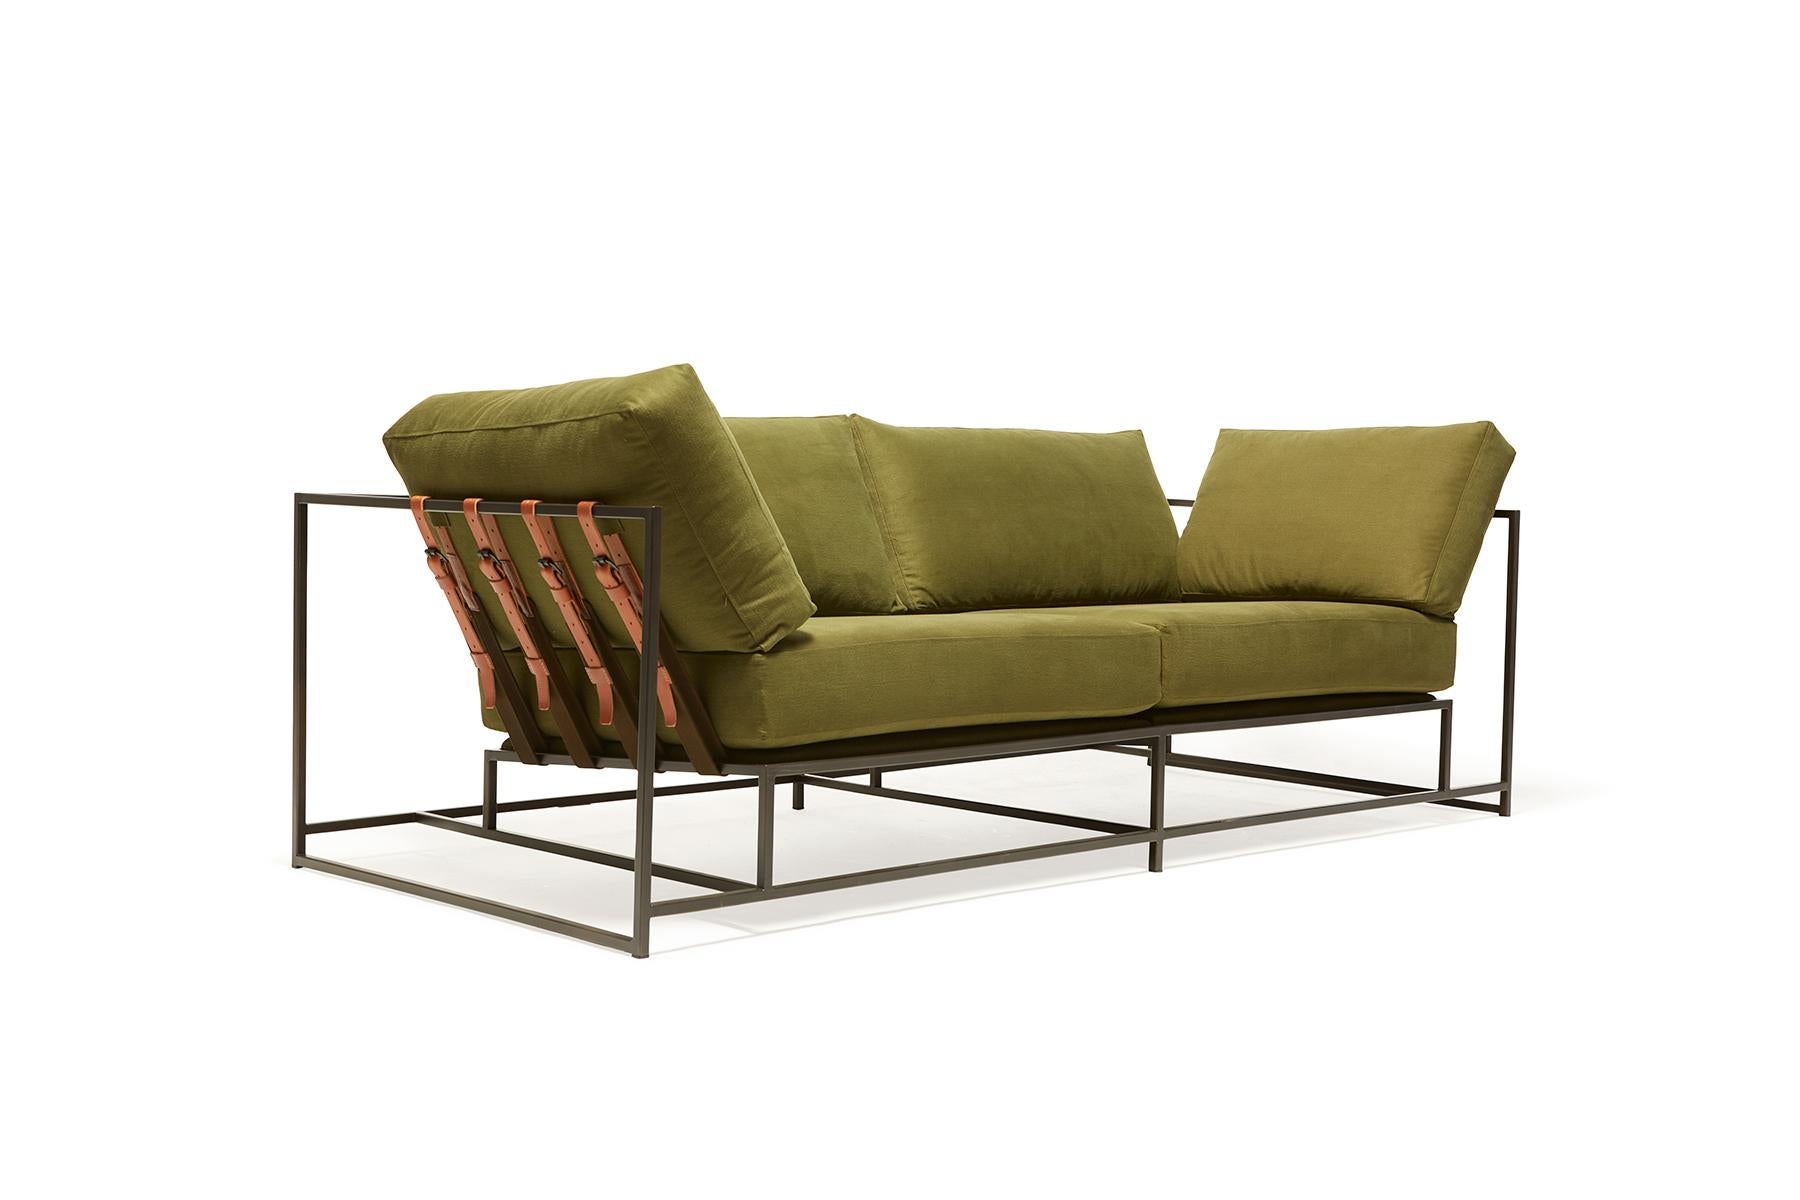 
The Inheritance Two Seat Sofa by Stephen Kenn is as comfortable as it is unique. The design features an exposed construction composed of three elements - a steel frame, plush upholstery, and supportive belts. The deep seating area is perfect for a